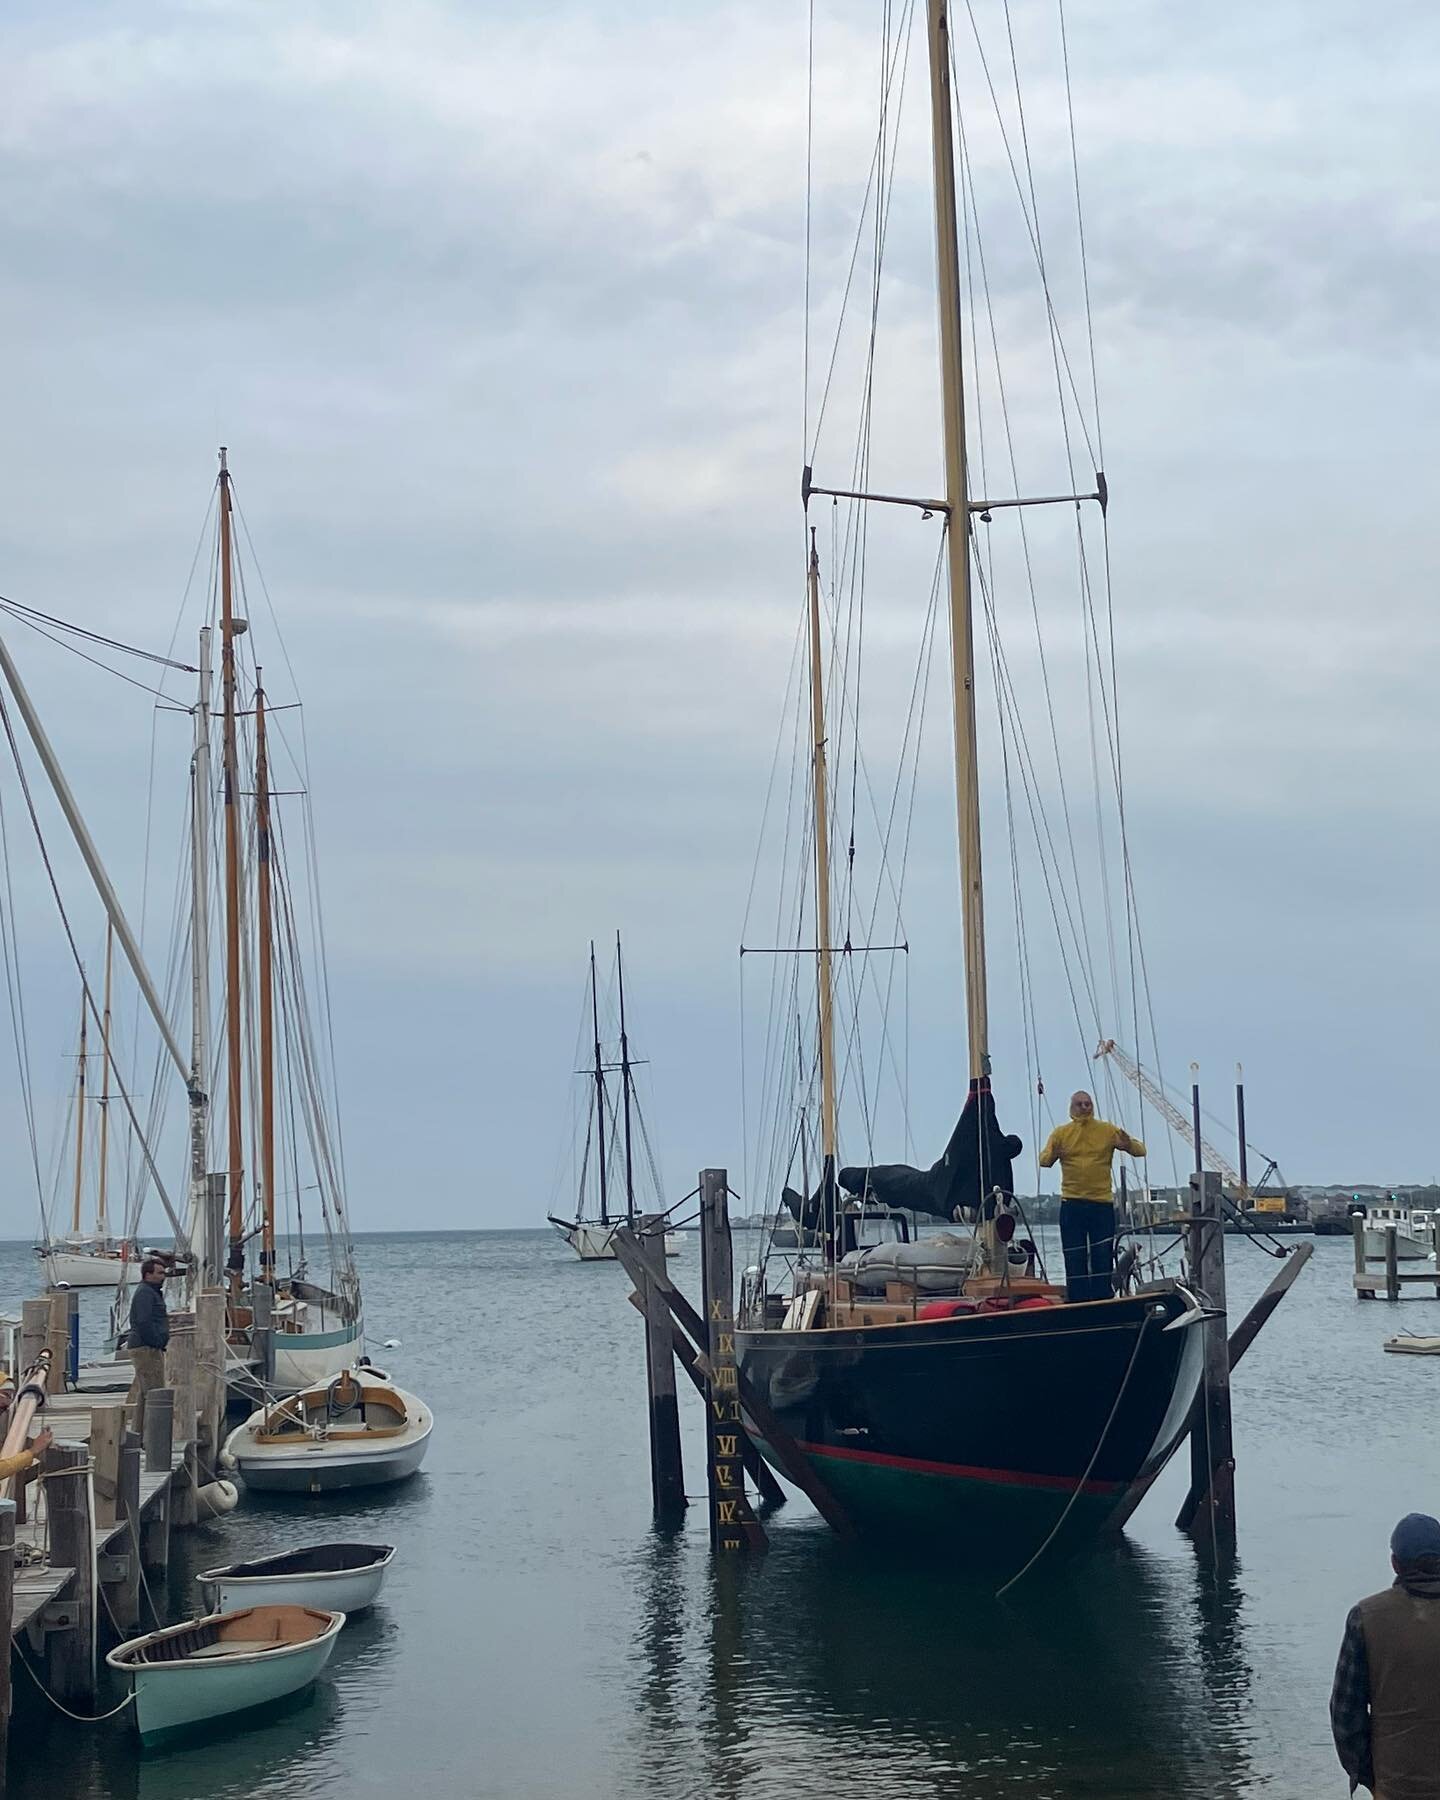 Happy to welcome back Sparkman &amp; Stephens yawl &ldquo;Legend&rdquo; to our yard. It&rsquo;s been decades since she was last here. She spent some time on the west coast and her new owner has brought her back to the east coast.
#classicyacht #spark